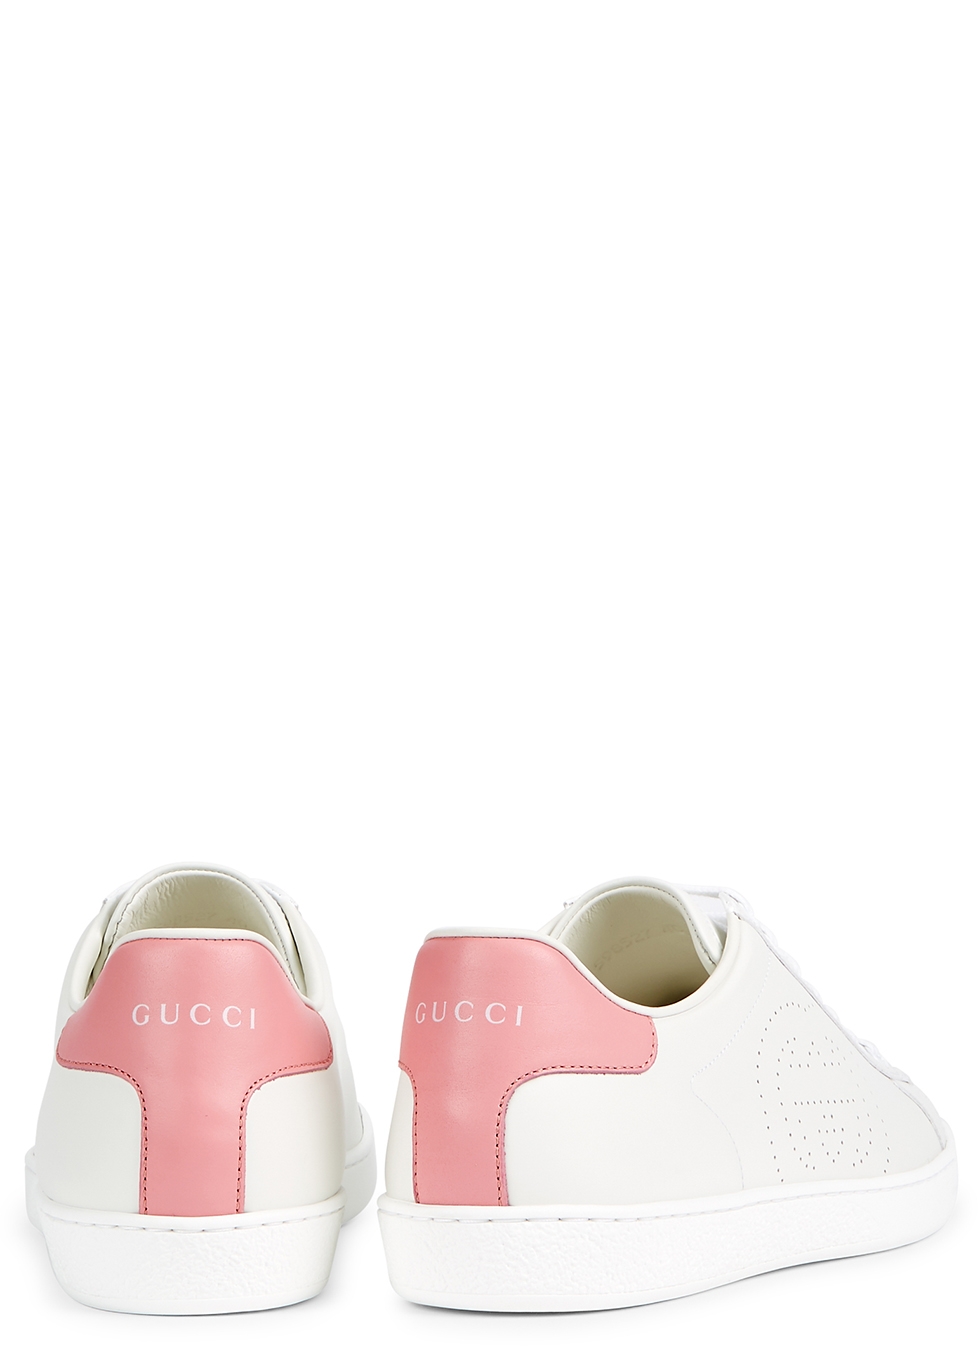 gucci white leather sneakers